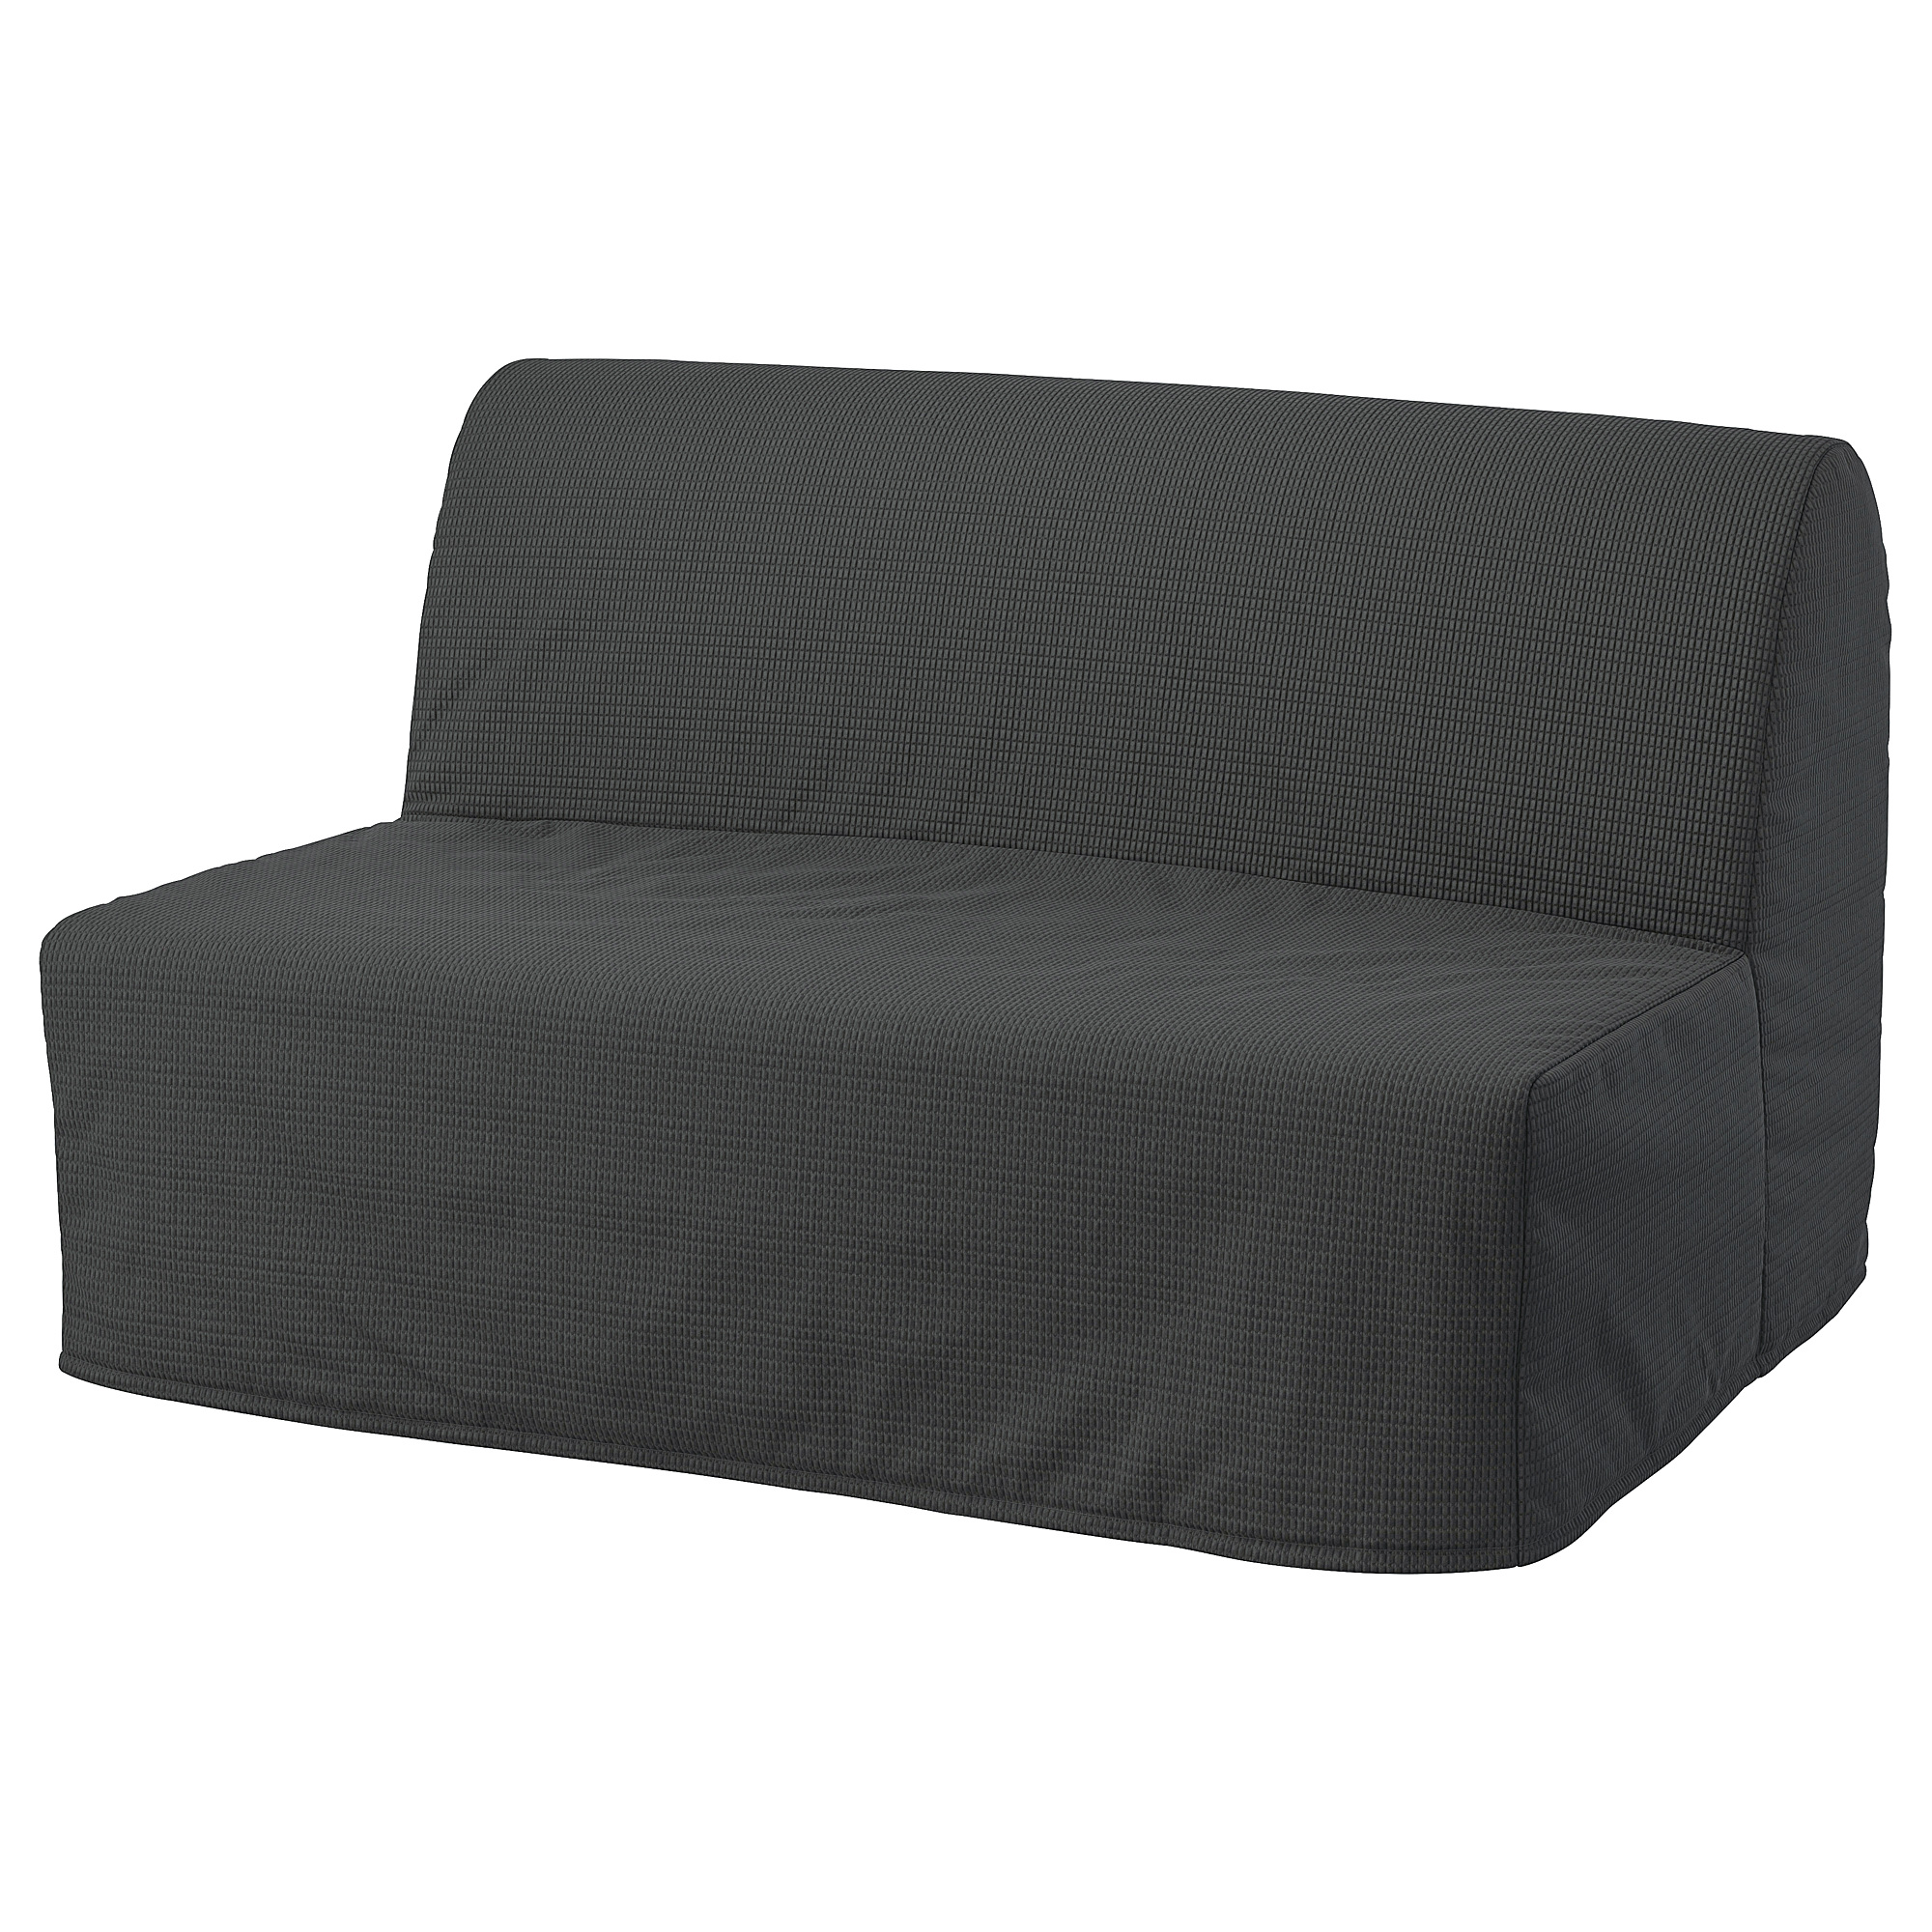 LYCKSELE cover for 2-seat sofa-bed